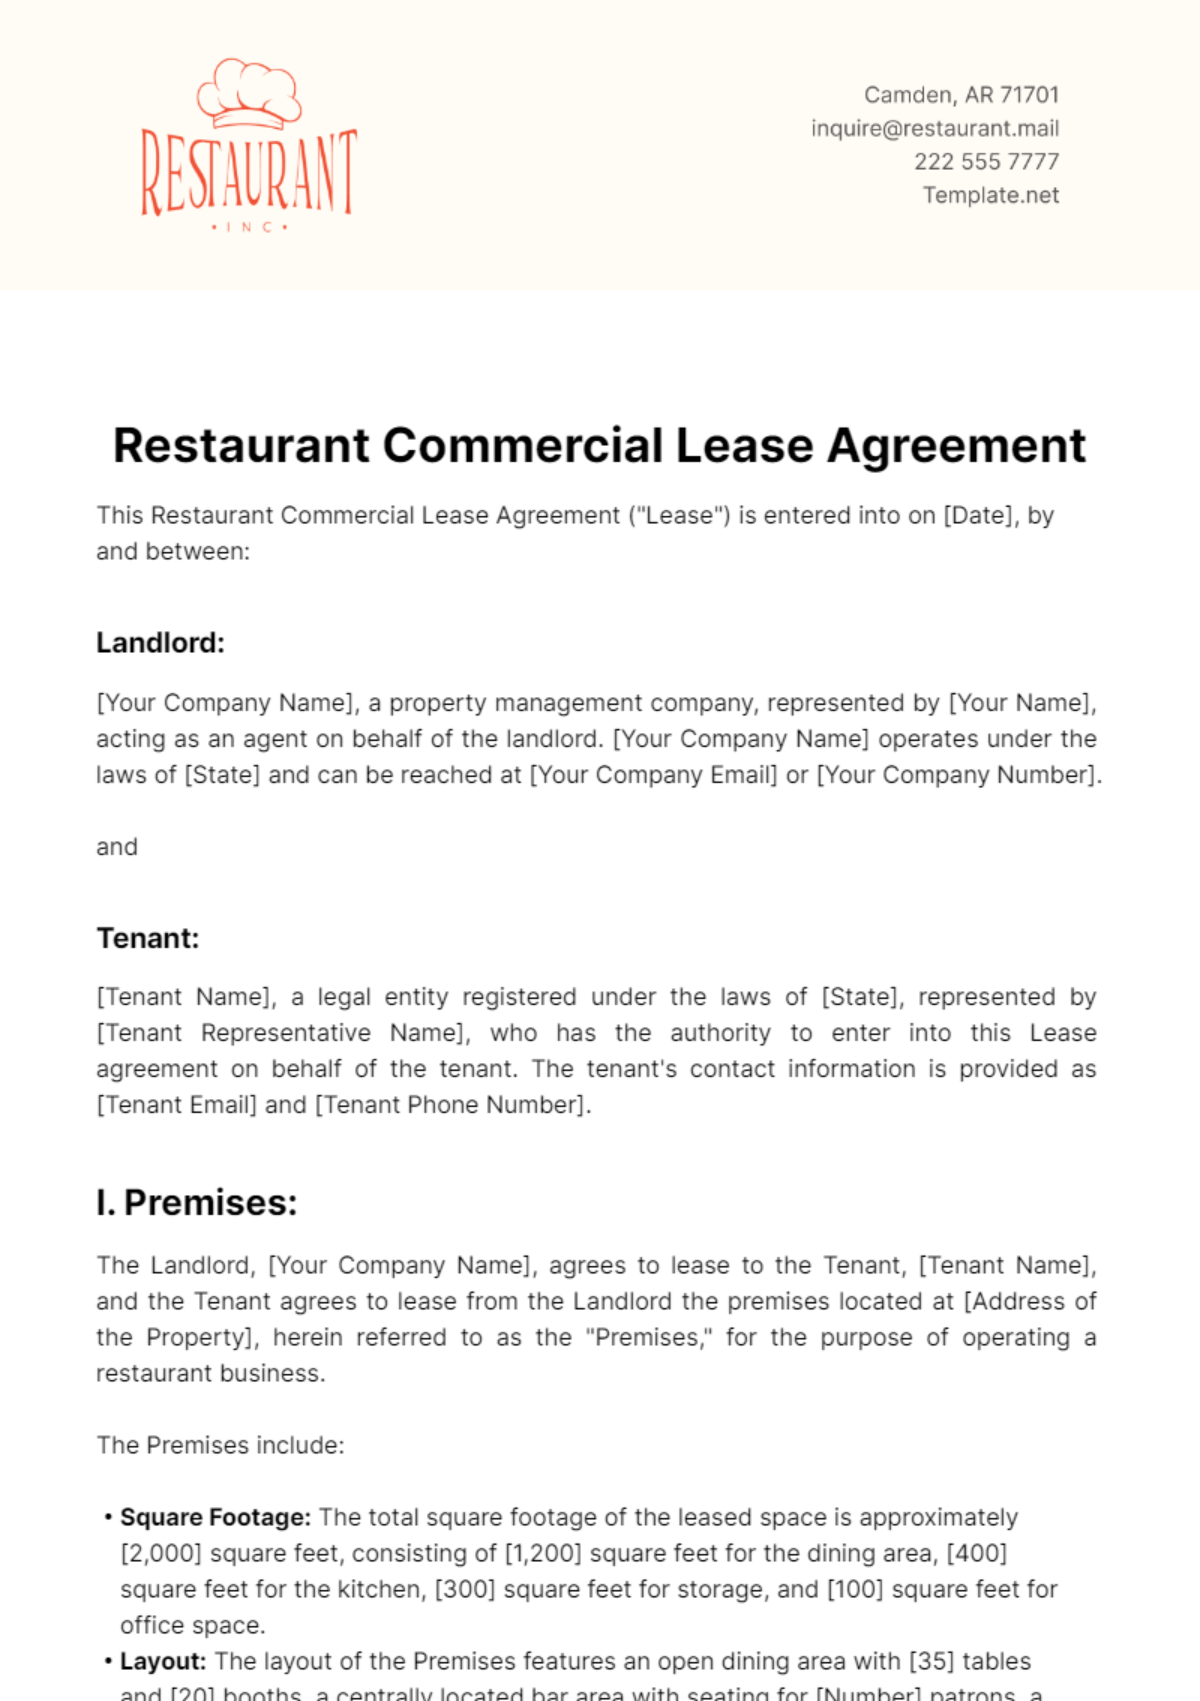 Restaurant Commercial Lease Agreement Template